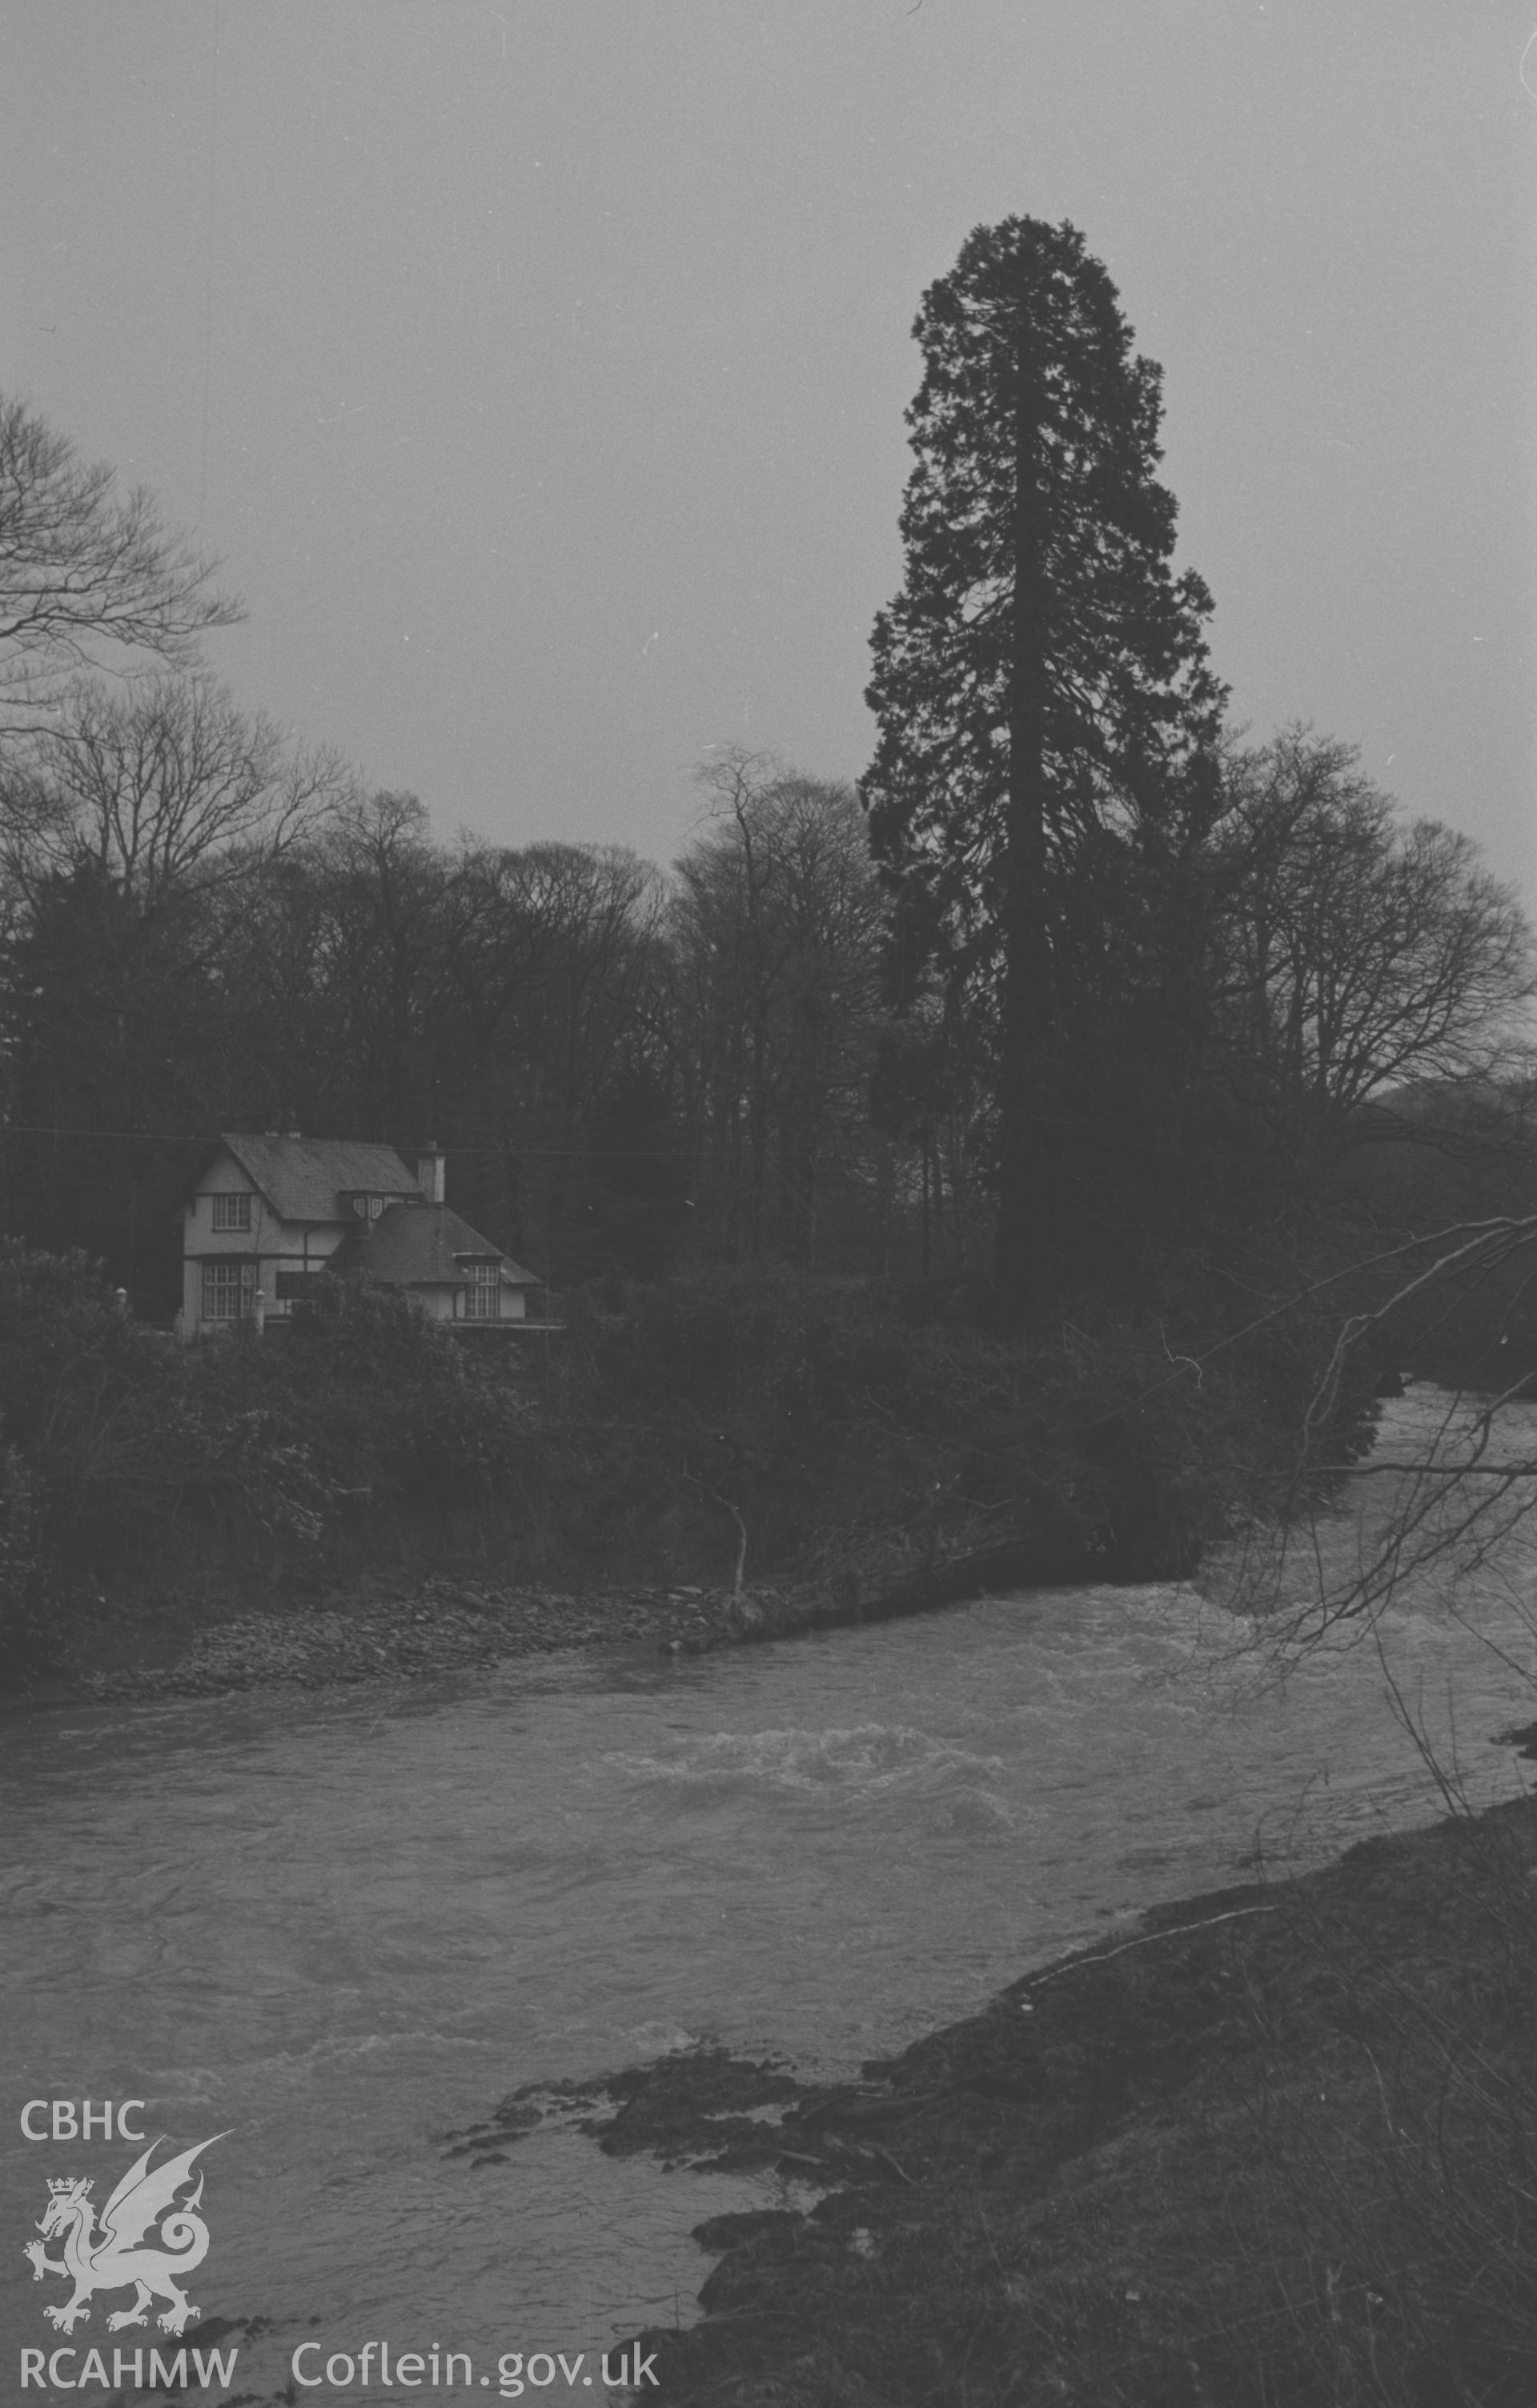 Digital copy of a black and white negative showing flood damage by the Ystwyth, with Trawscoed Lodge on the left. Photographed by Arthur O. Chater in December 1964 from Grid Reference SN 6660 7315, looking south east.